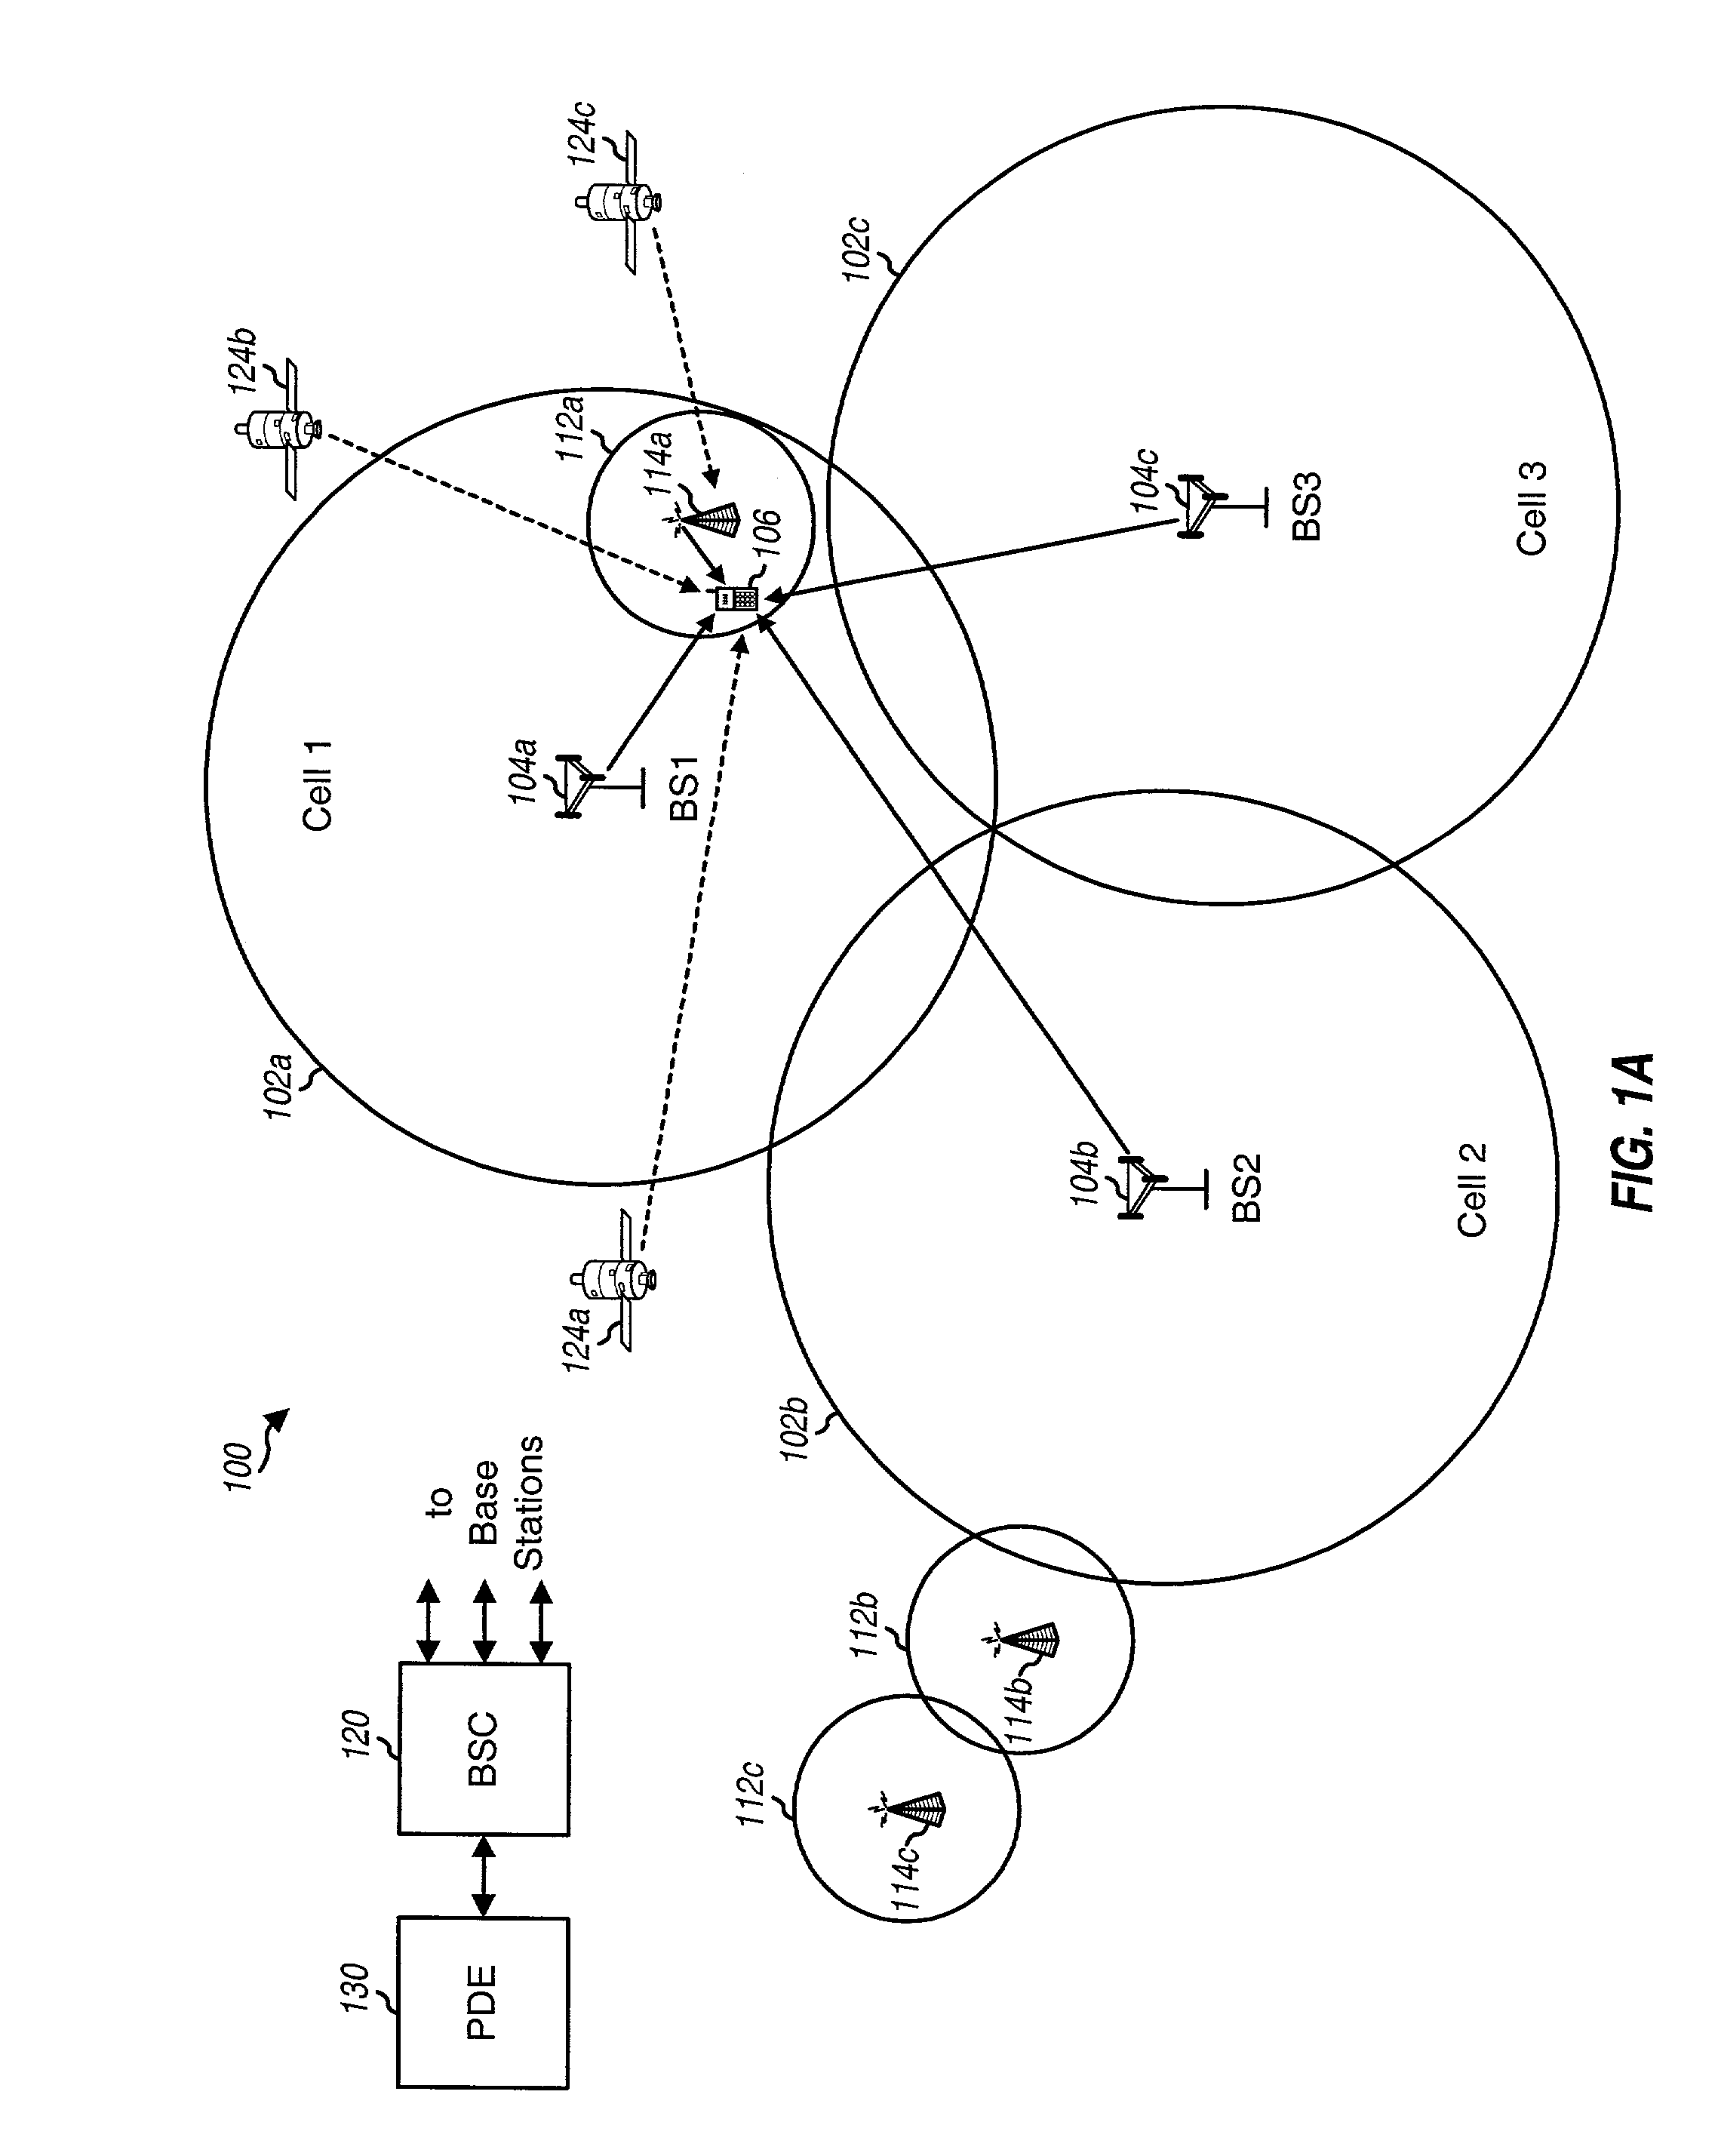 Method and apparatus for estimating the position of a terminal based on identification codes for transmission sources